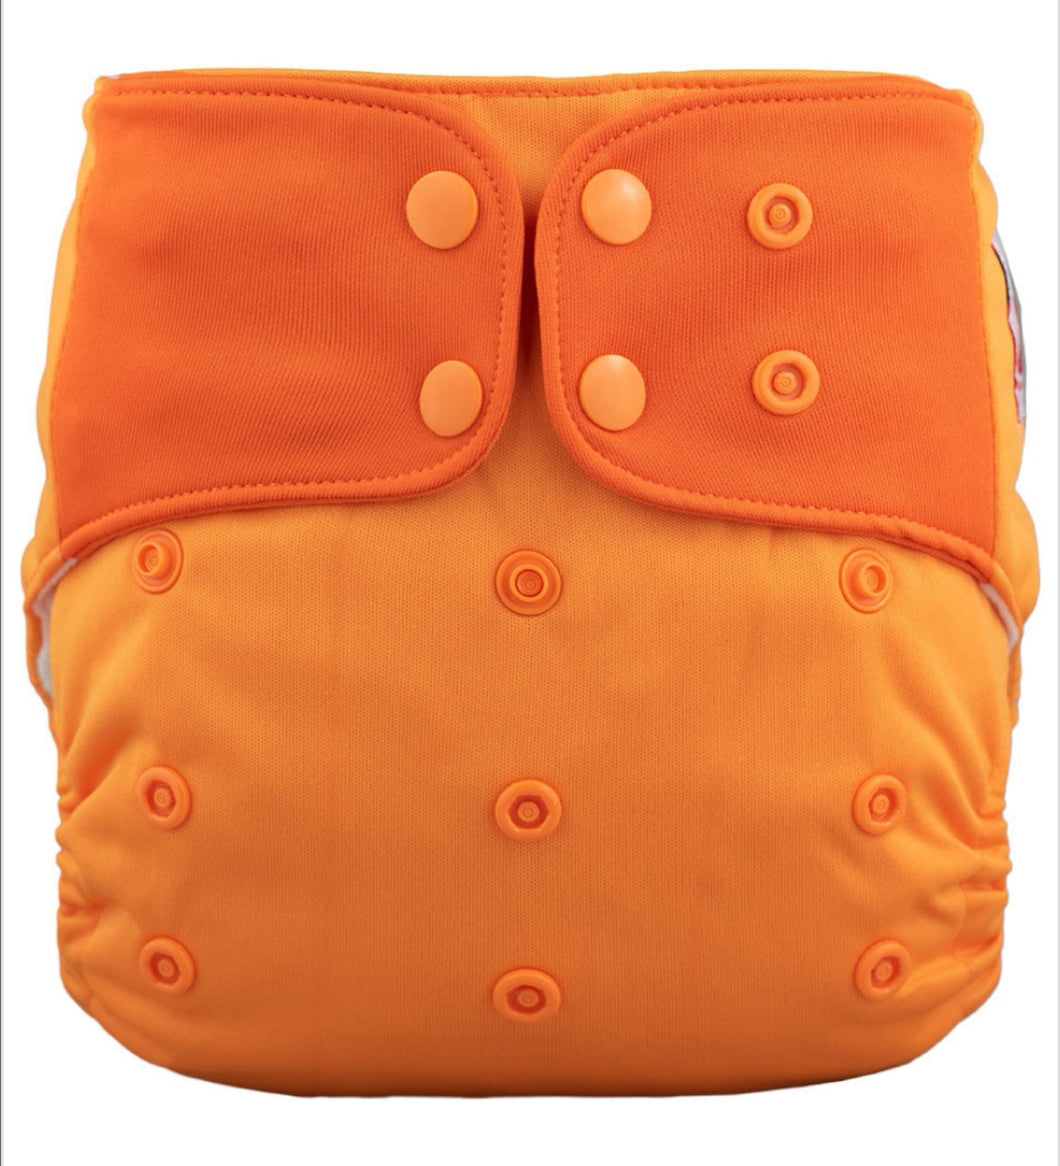 Lichtbaby pocket, Orange. Includes 1 bamboo terry insert